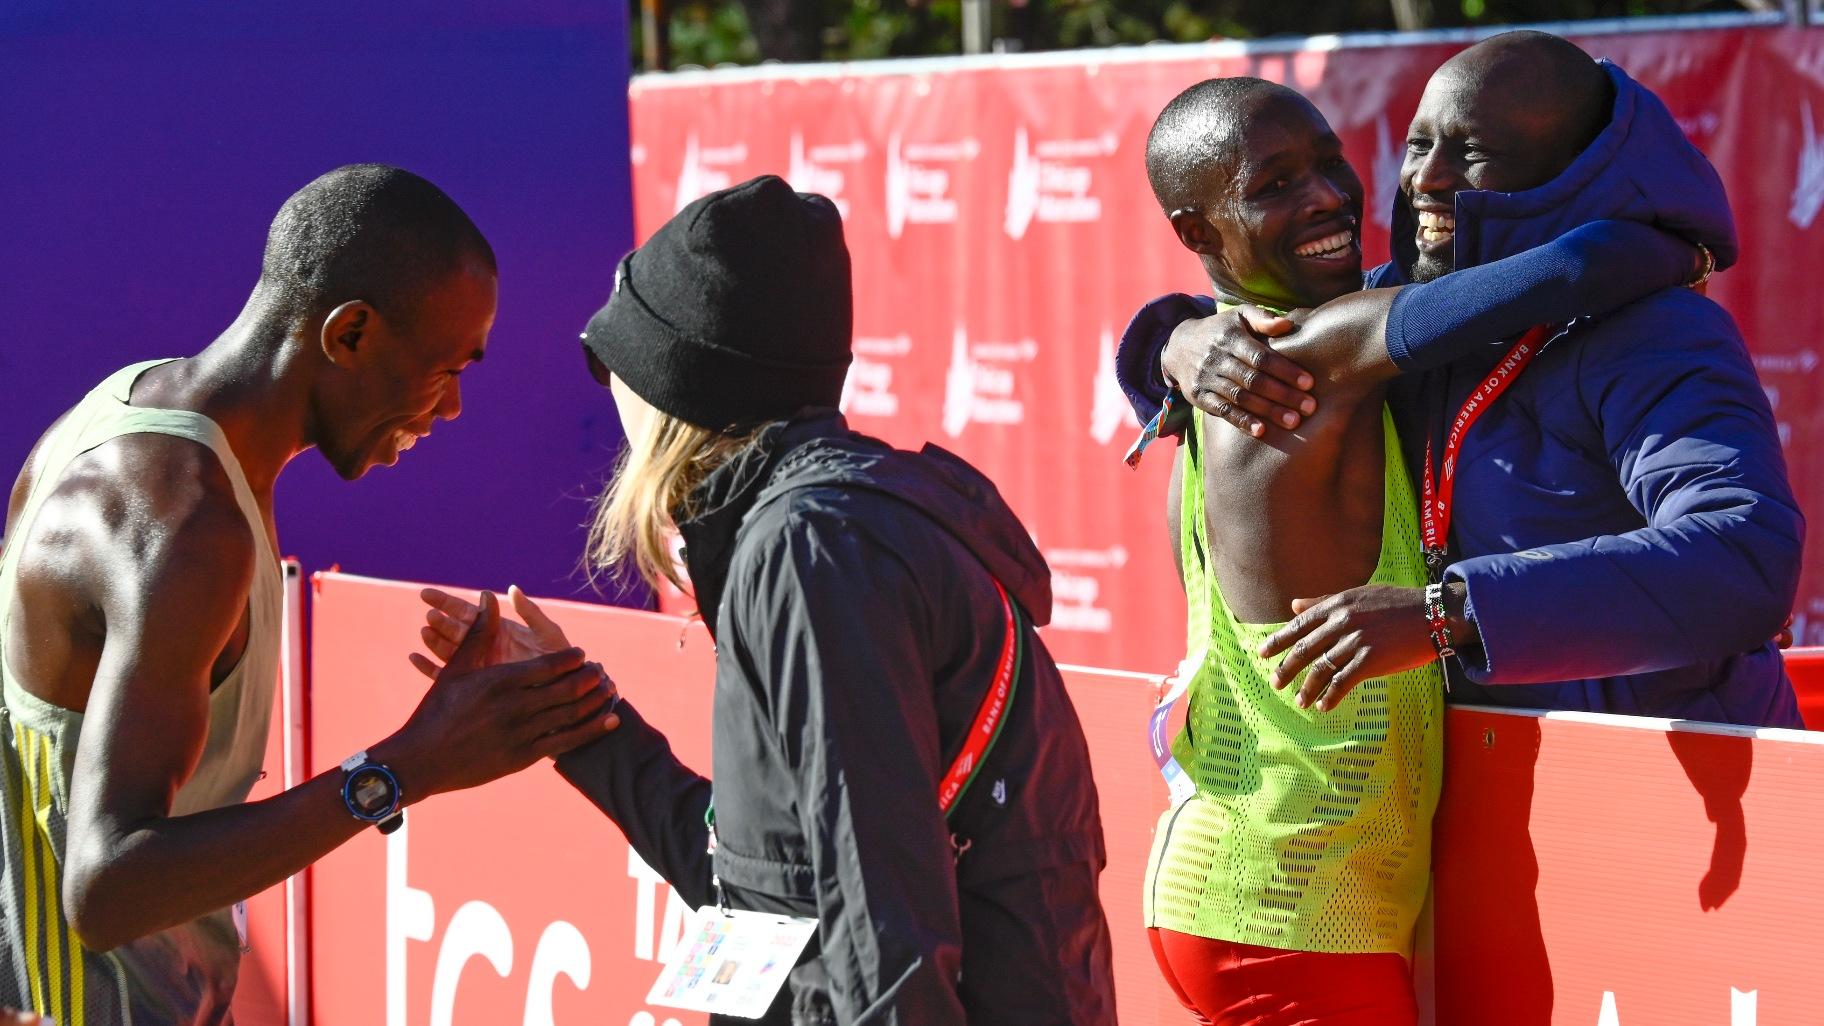 Benson Kipruto, left, and John Korir, second from right, both of Kenya, celebrate after they ran the Chicago Marathon, Sunday, Oct. 9, 2022, in Chicago. Kipruto took first place and Korir took third. (AP Photo / Matt Marton)